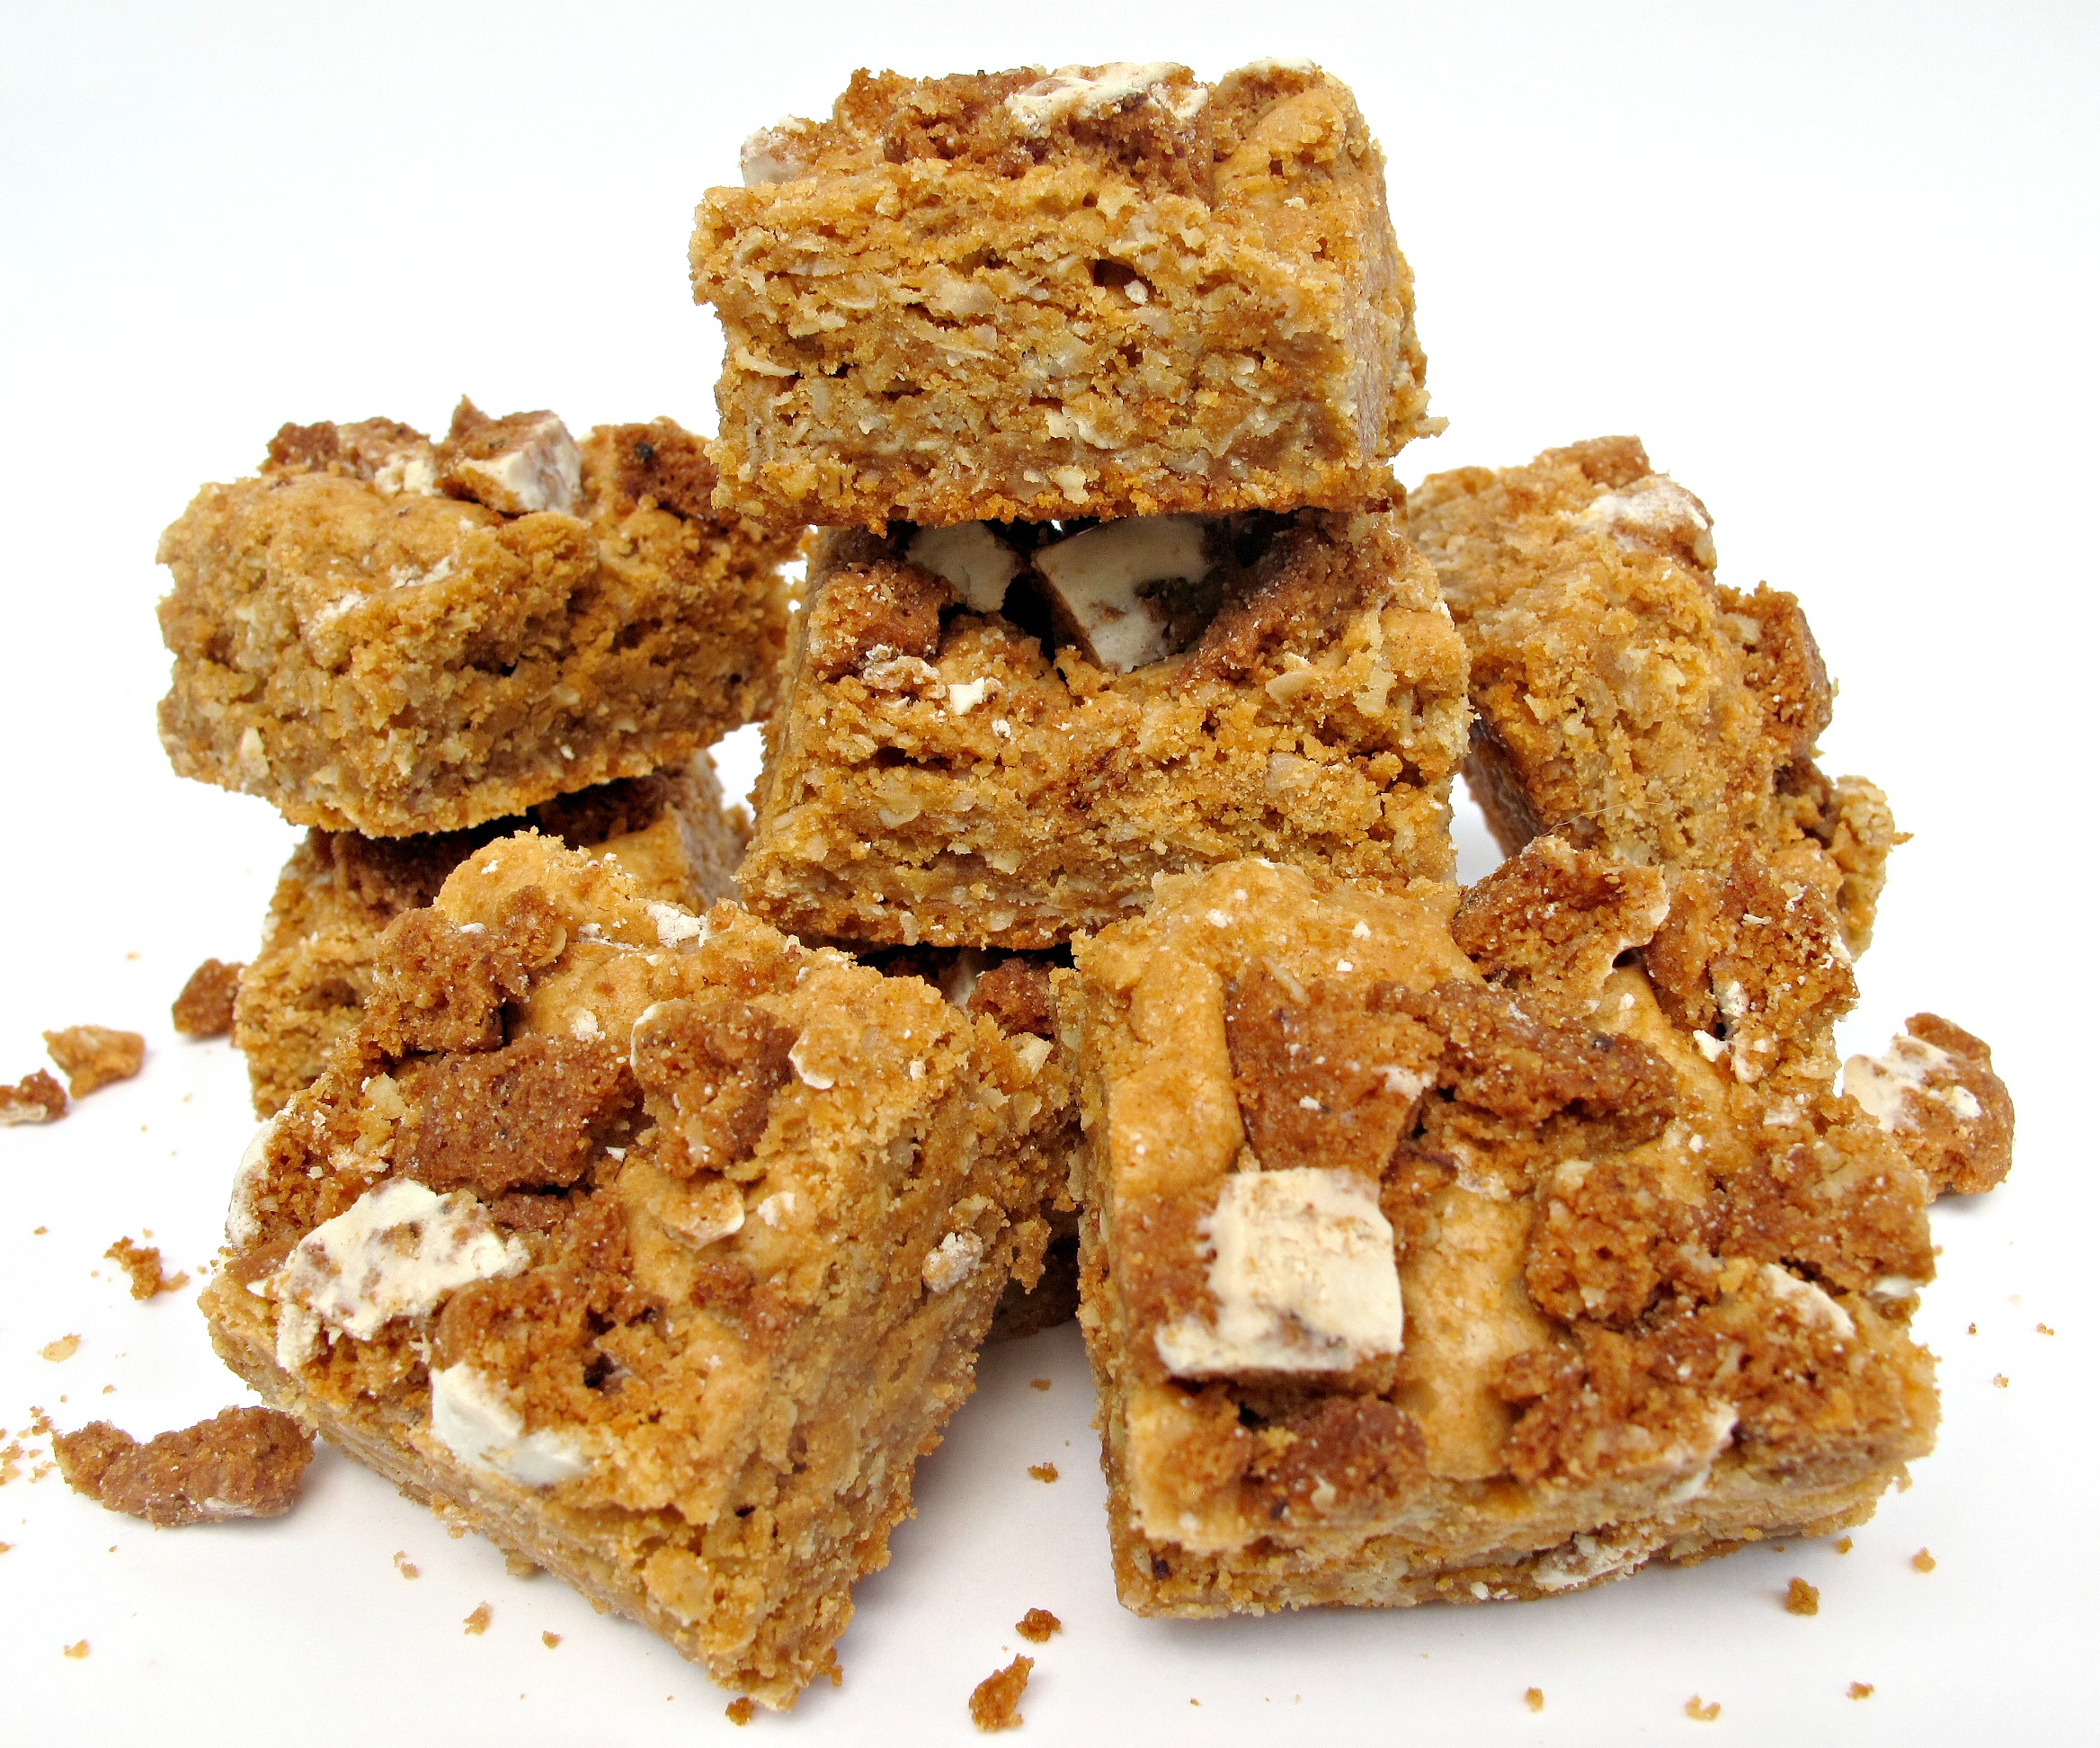 Butterscotch Oatmeal Bars topped with crumbled oatmeal cookies.